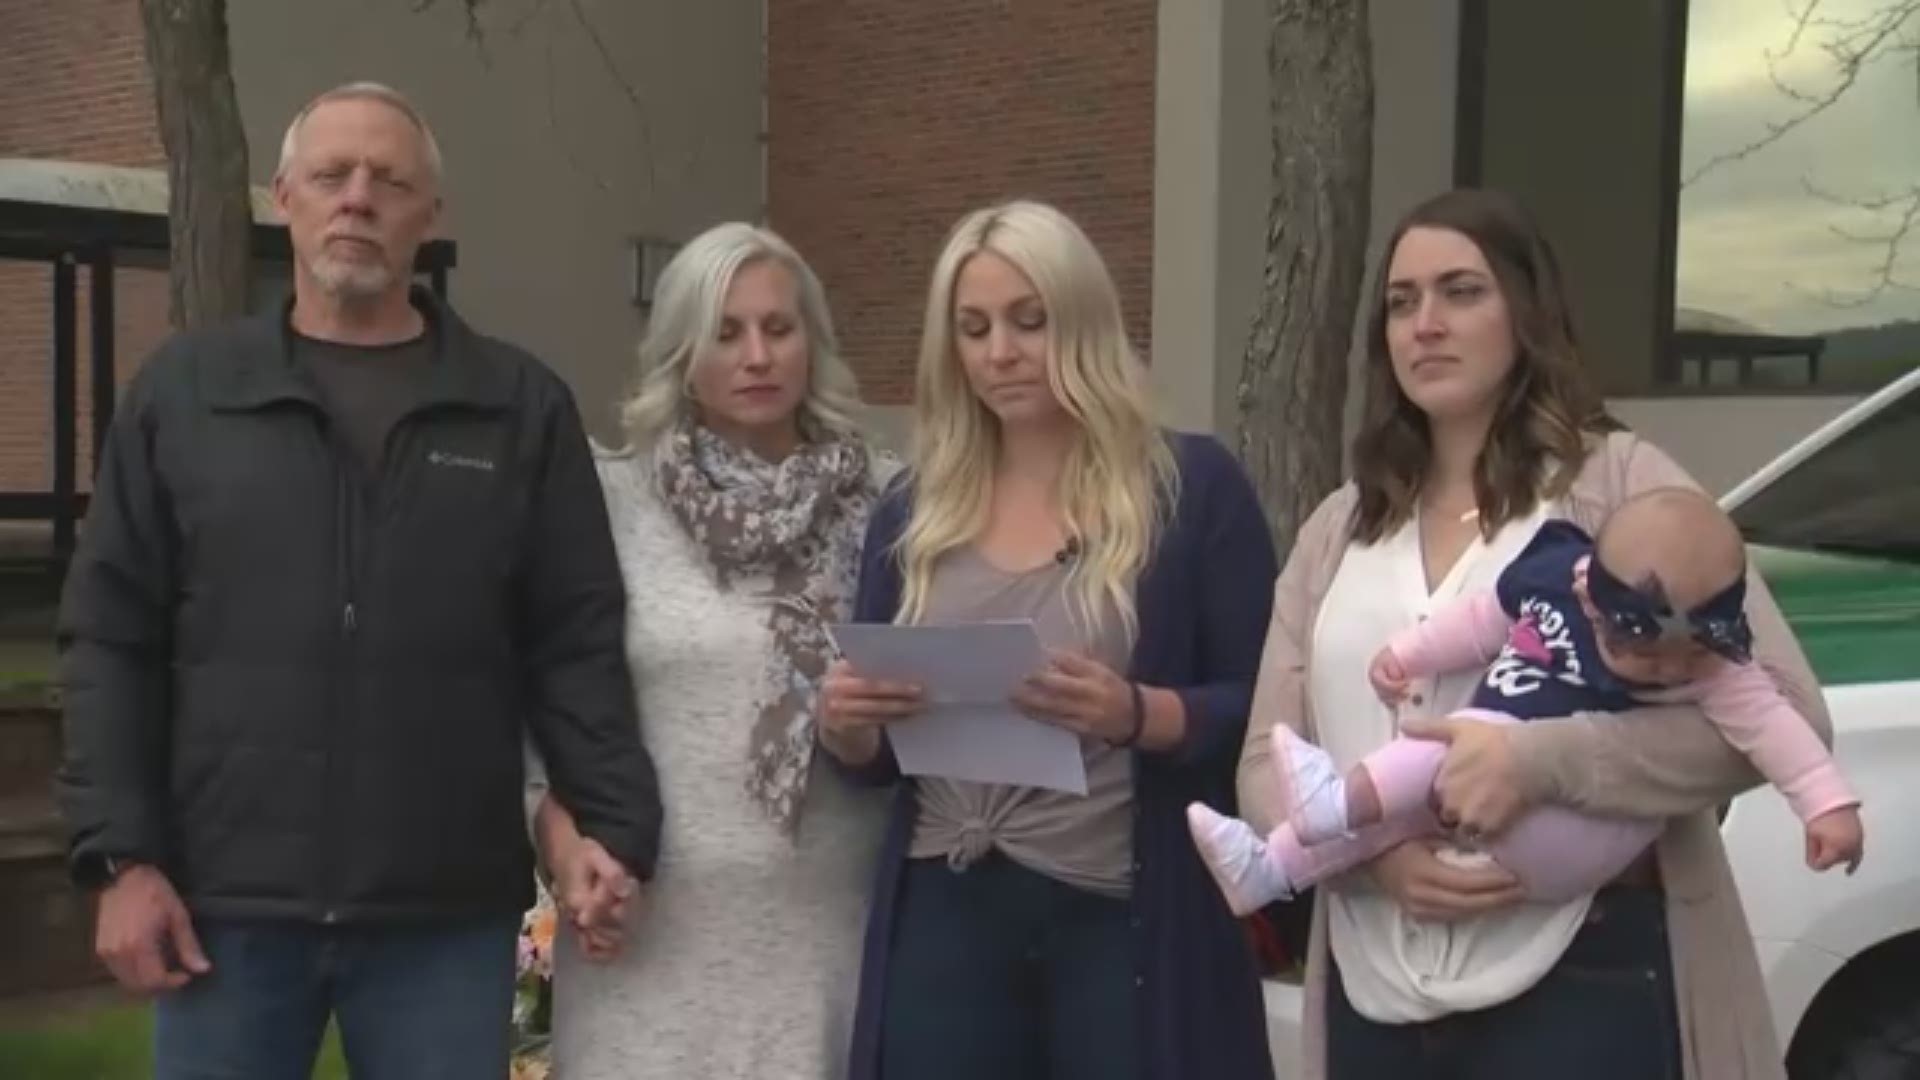 Cowlitz County sheriff's deputy Justin DeRosier's family read a statement to the media on Monday, April 22.